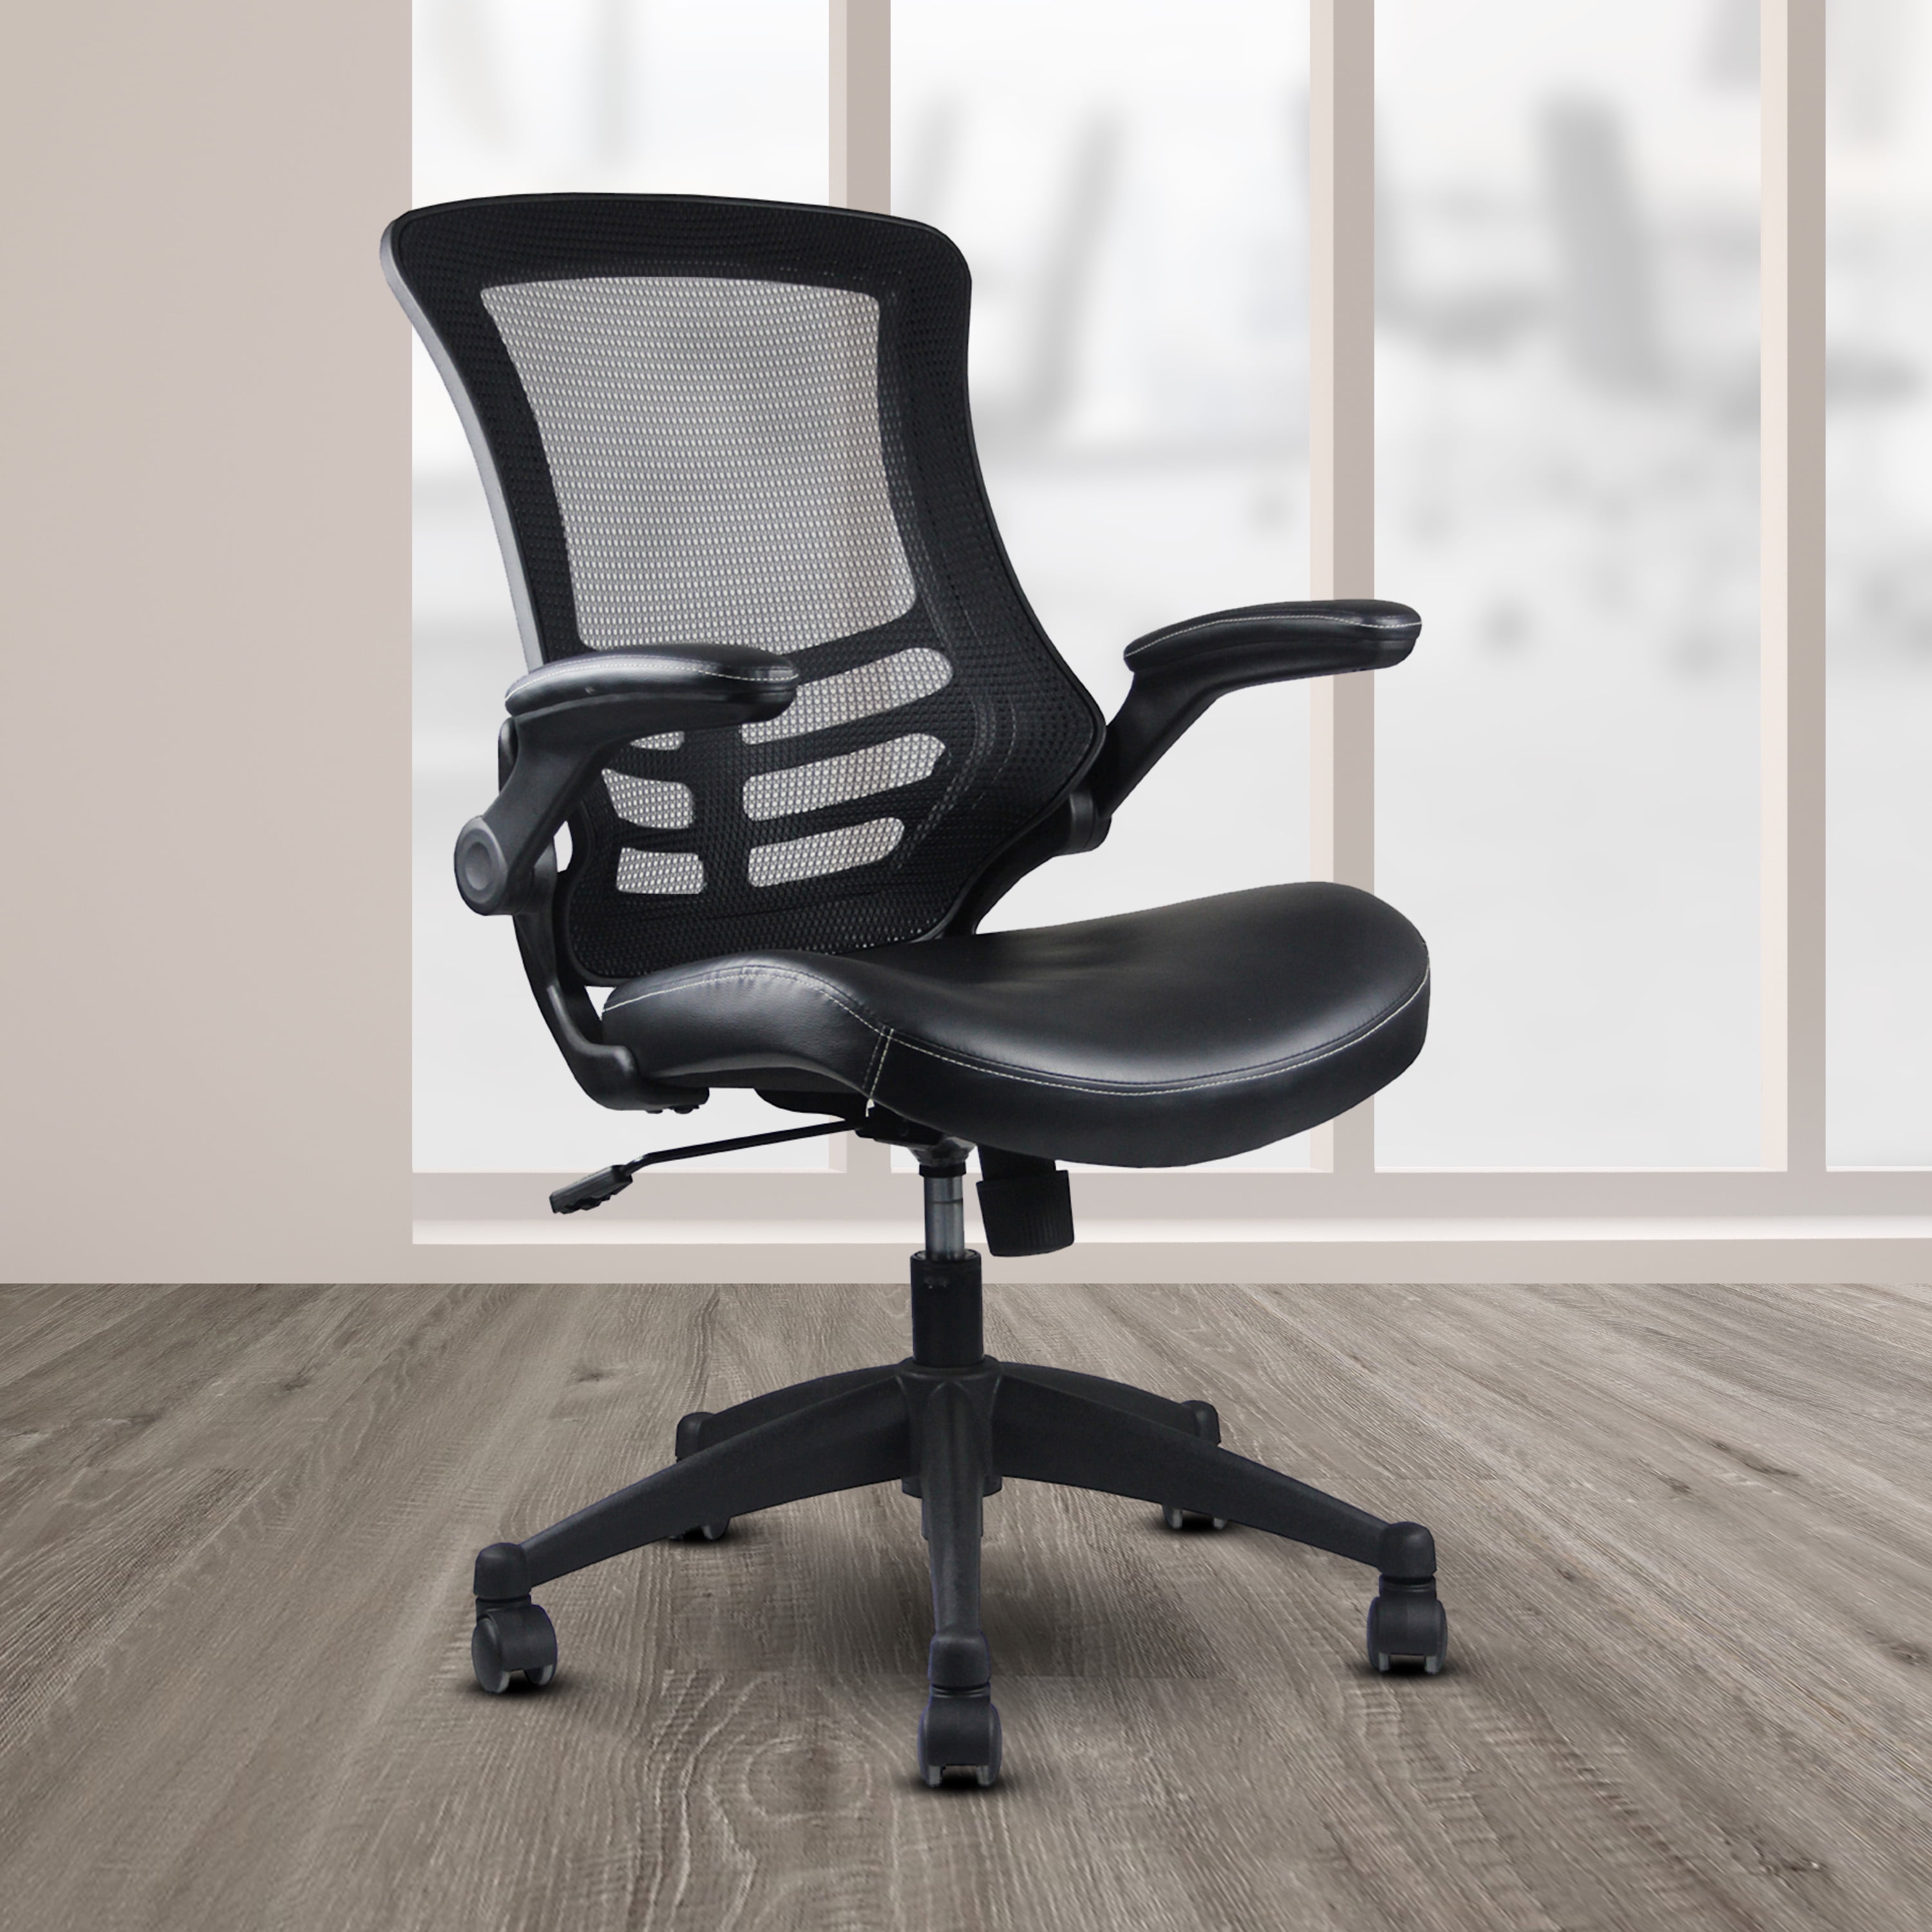 Techni Mobili Stylish Mid-Back Mesh Office Chair with Adjustable Arms